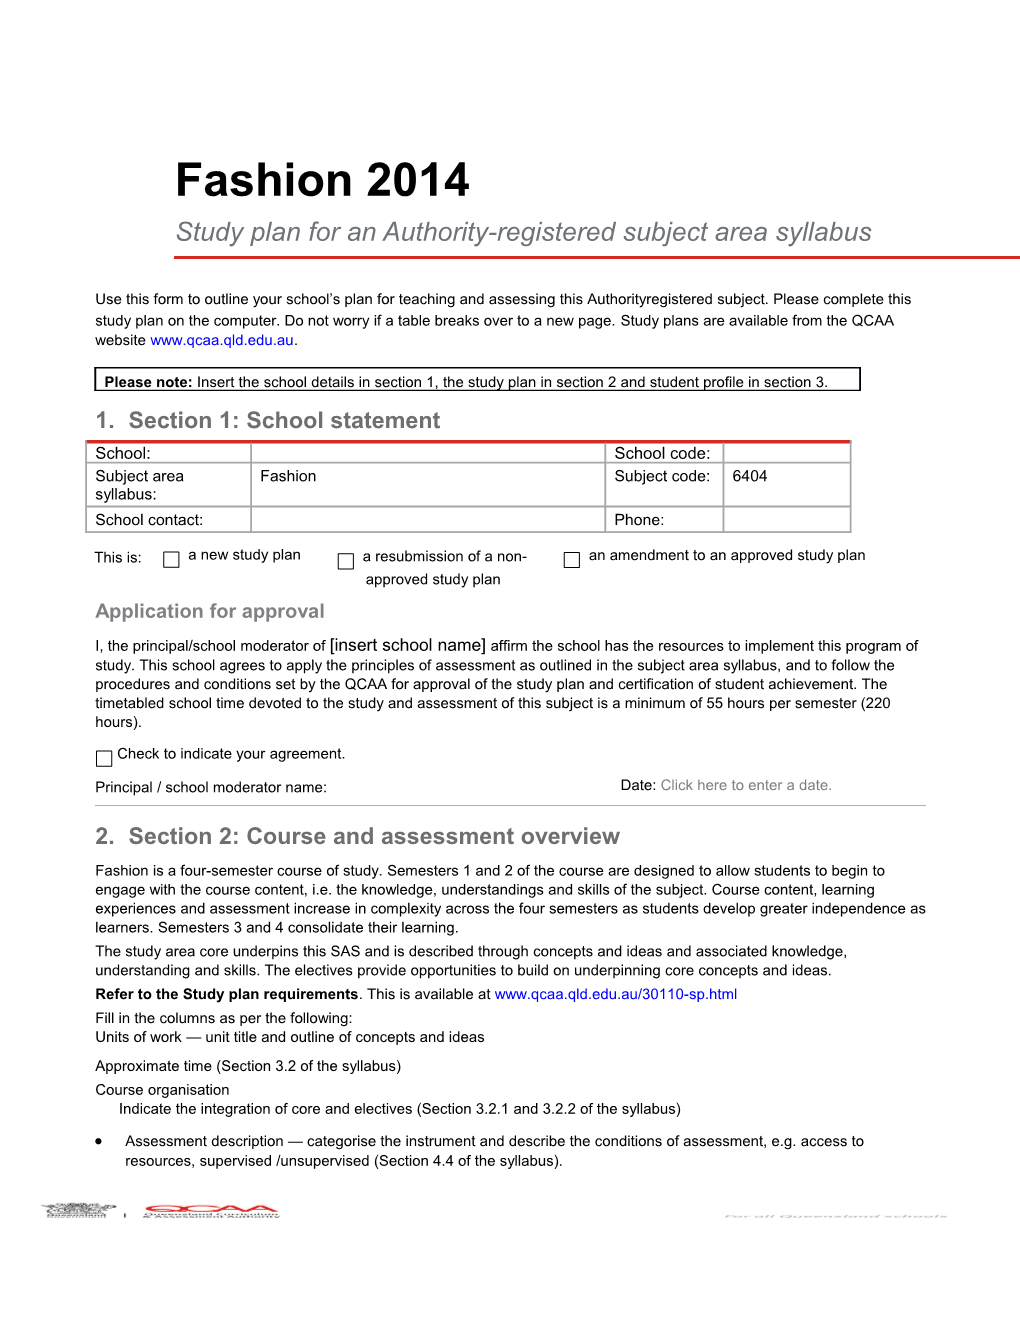 Fashion 2014 Study Plan for an Authority-Registered Subject Area Syllabus